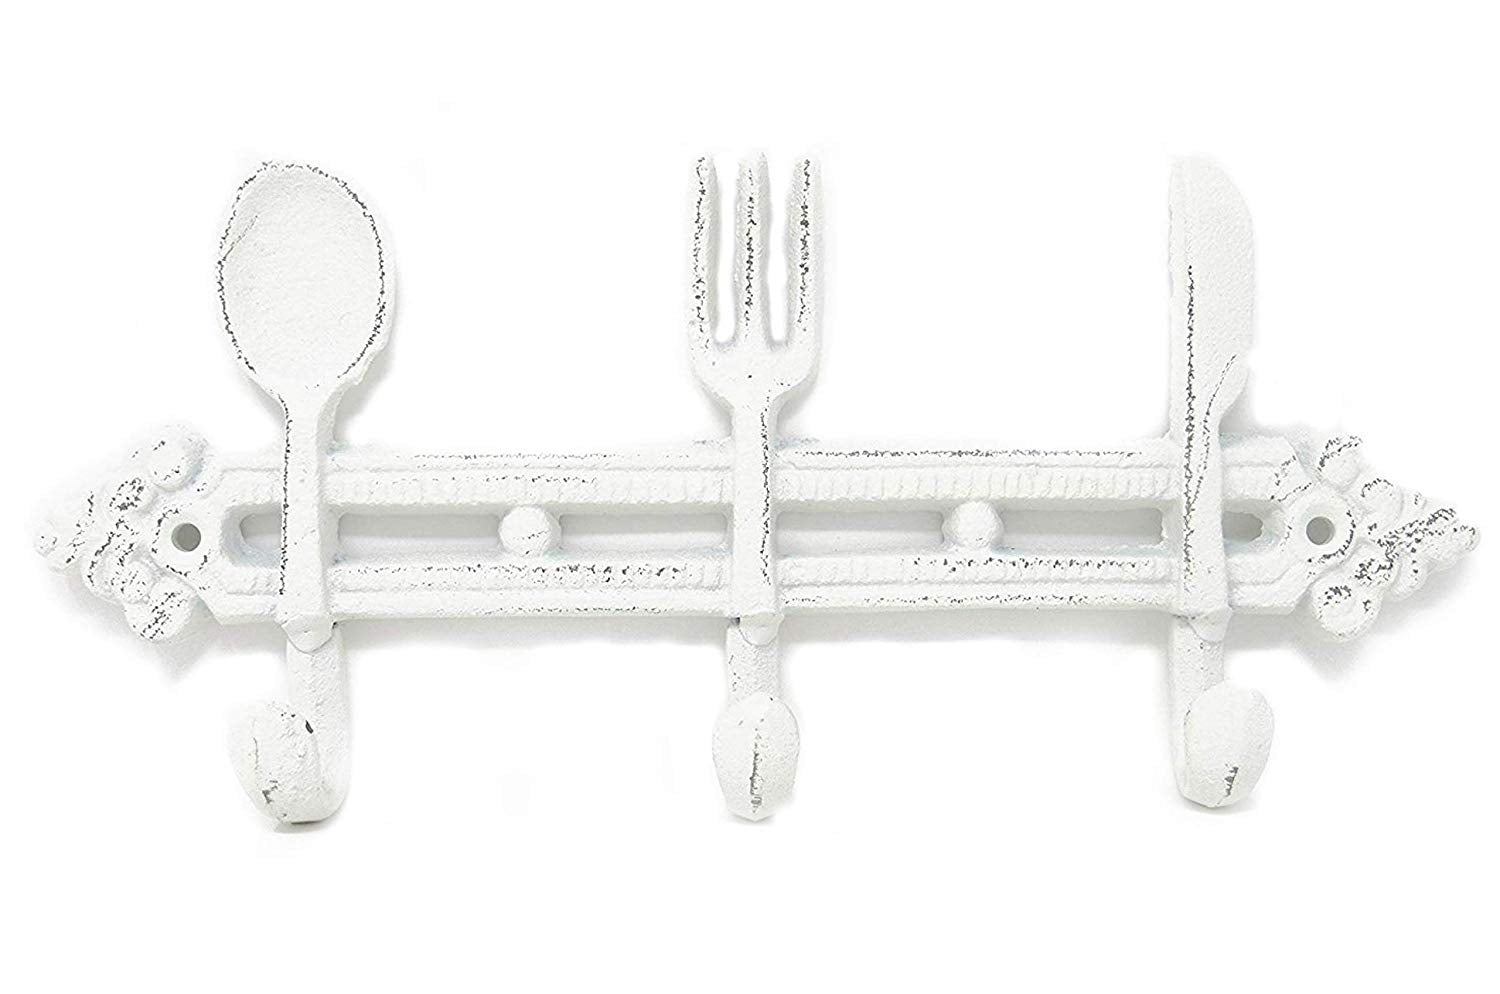 Cast Iron Utensil Spoon, Knife & Fork with 3 Wall Hooks - Decorative Kitchen Towel Hook Holder, Shabby Chic, Holds Coats, Bags, Hats, Scarf’s - Includes Screws & Anchors -11.0 x 5 x 1.5